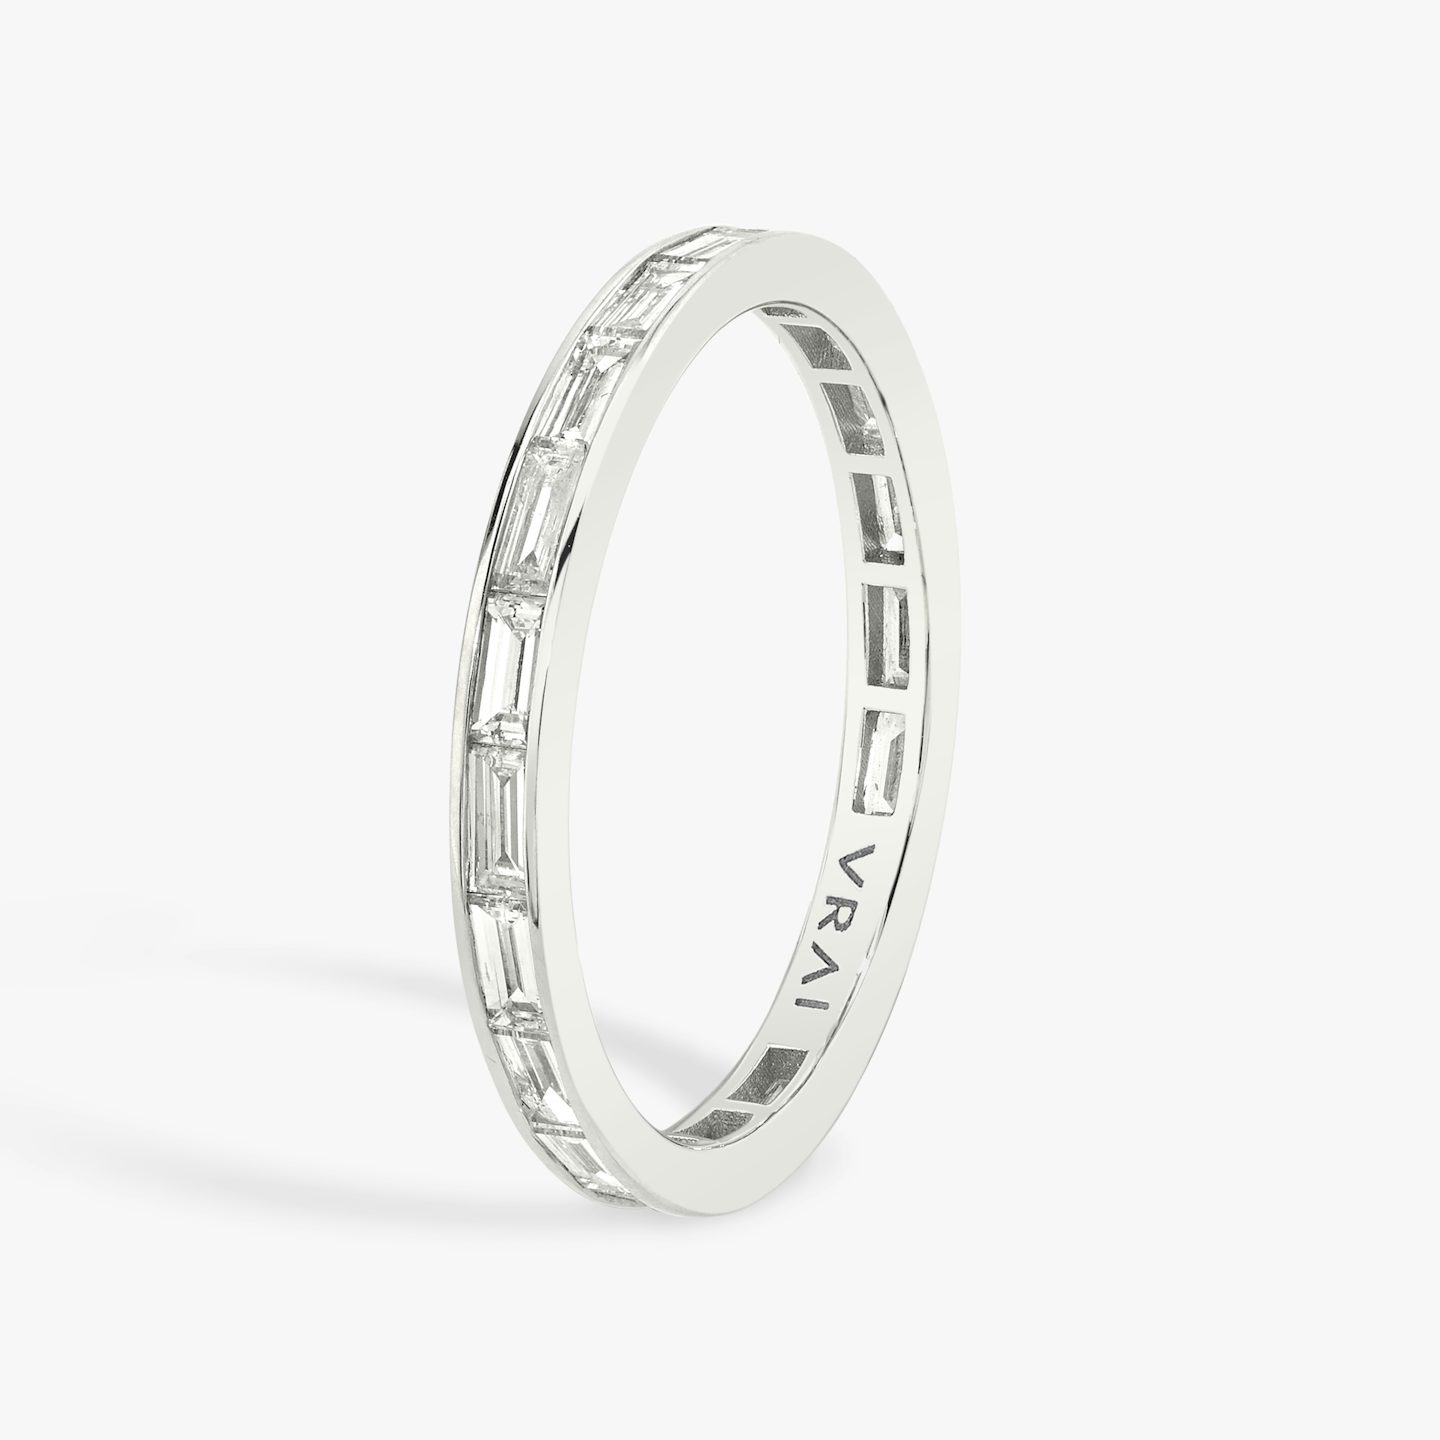 The Devotion Band | Baguette | 18k | 18k White Gold | Band style: Full diamond | Band width: Large